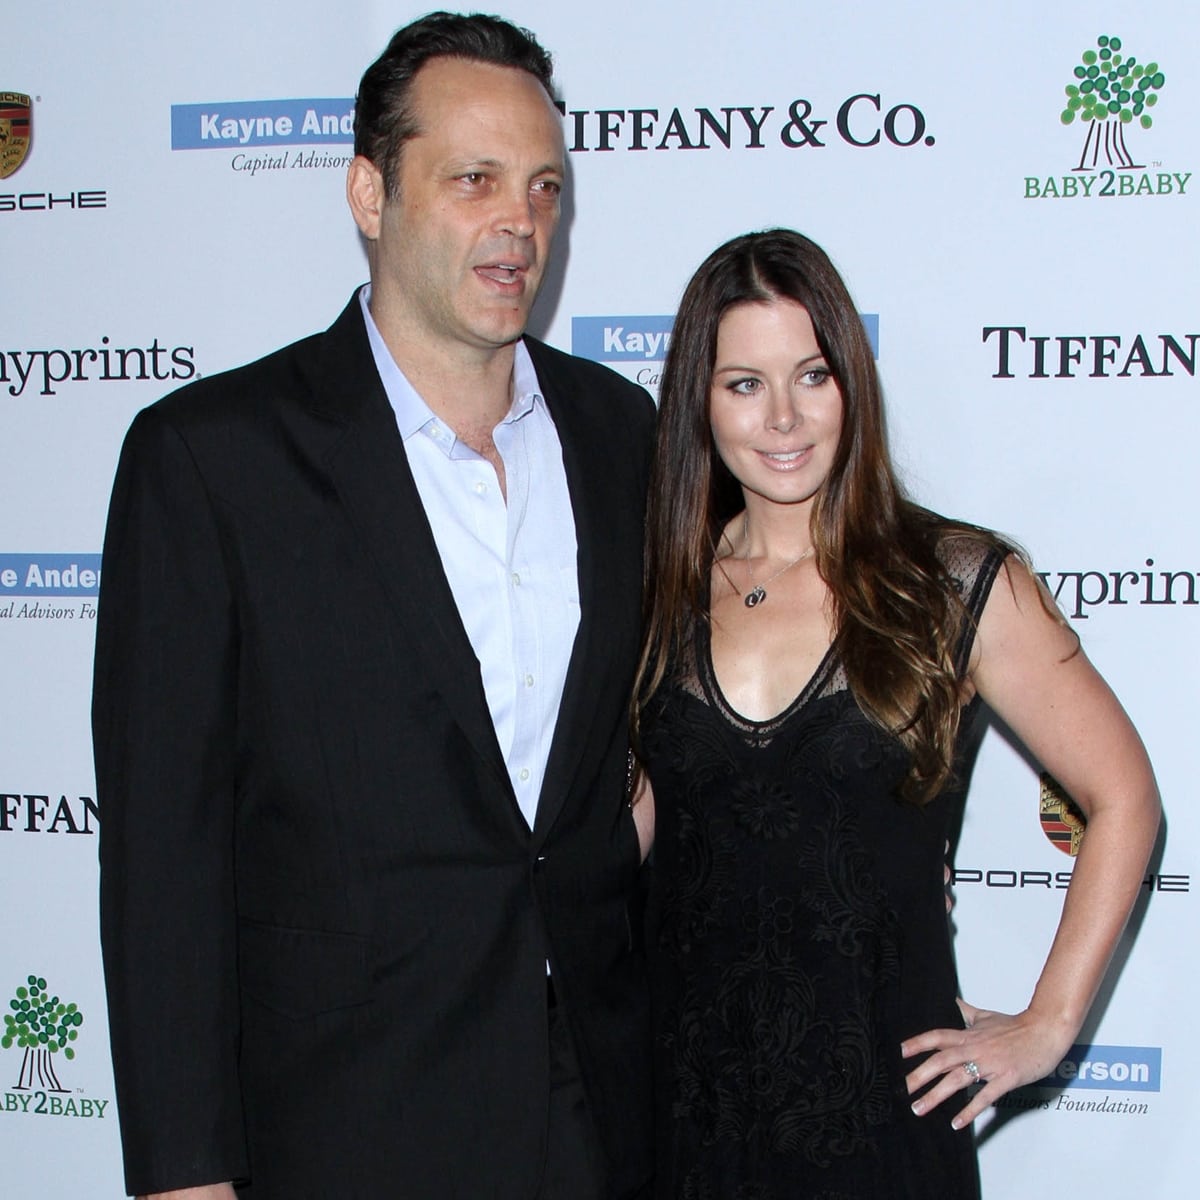 Kyla Weber and Vince Vaughn were introduced to each other by Vaughn's movie producer friend